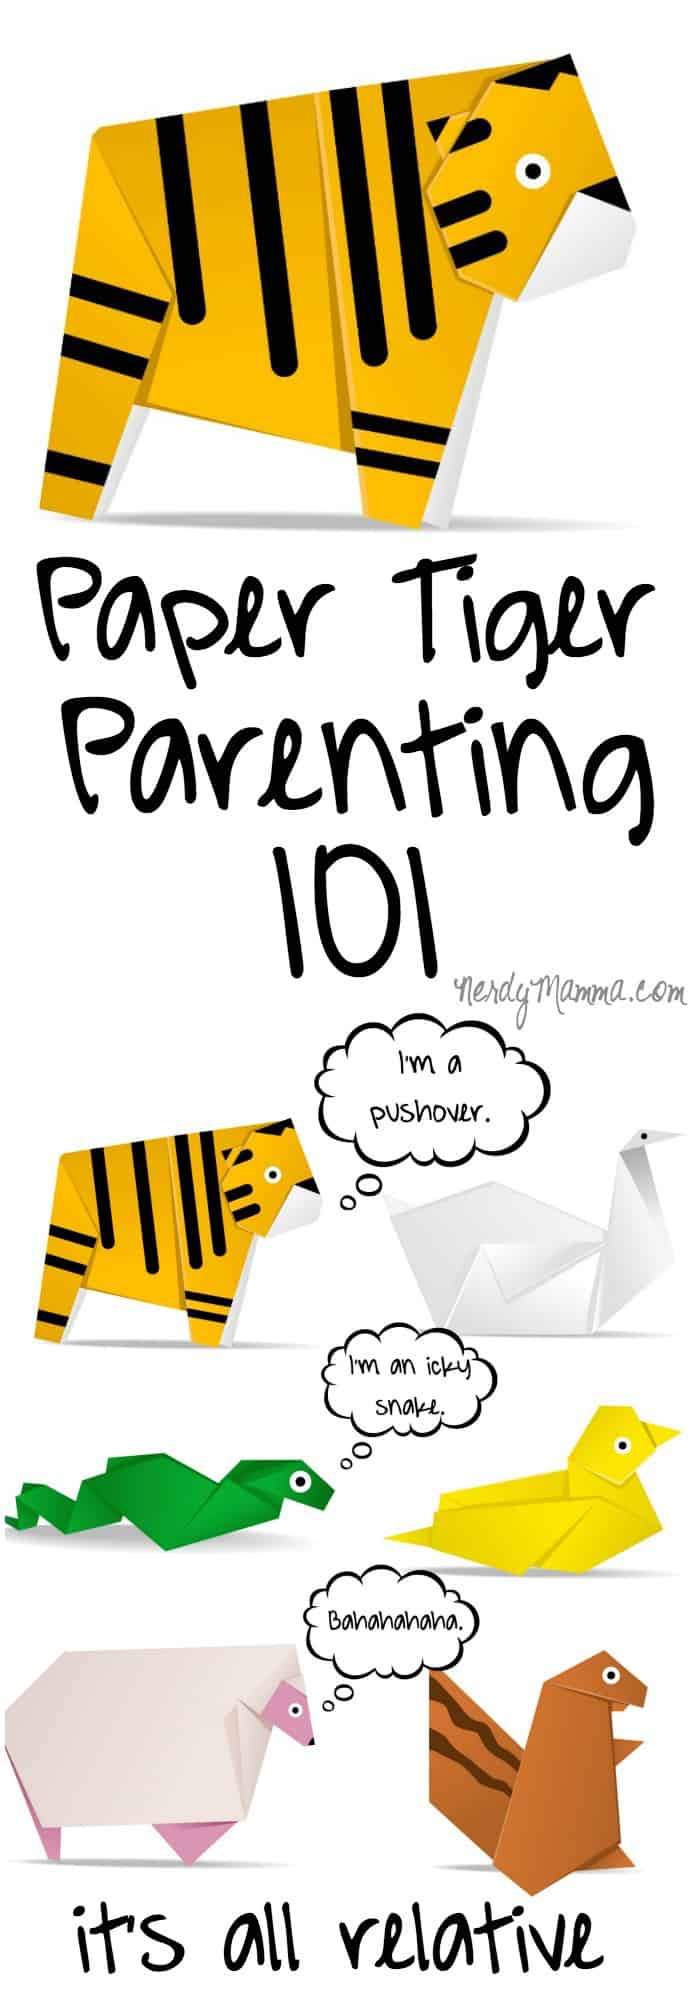 I freely admit I'm a Paper Tiger Parent. I am such a shoot-from-the-hip-parent, but it makes life fun. So...